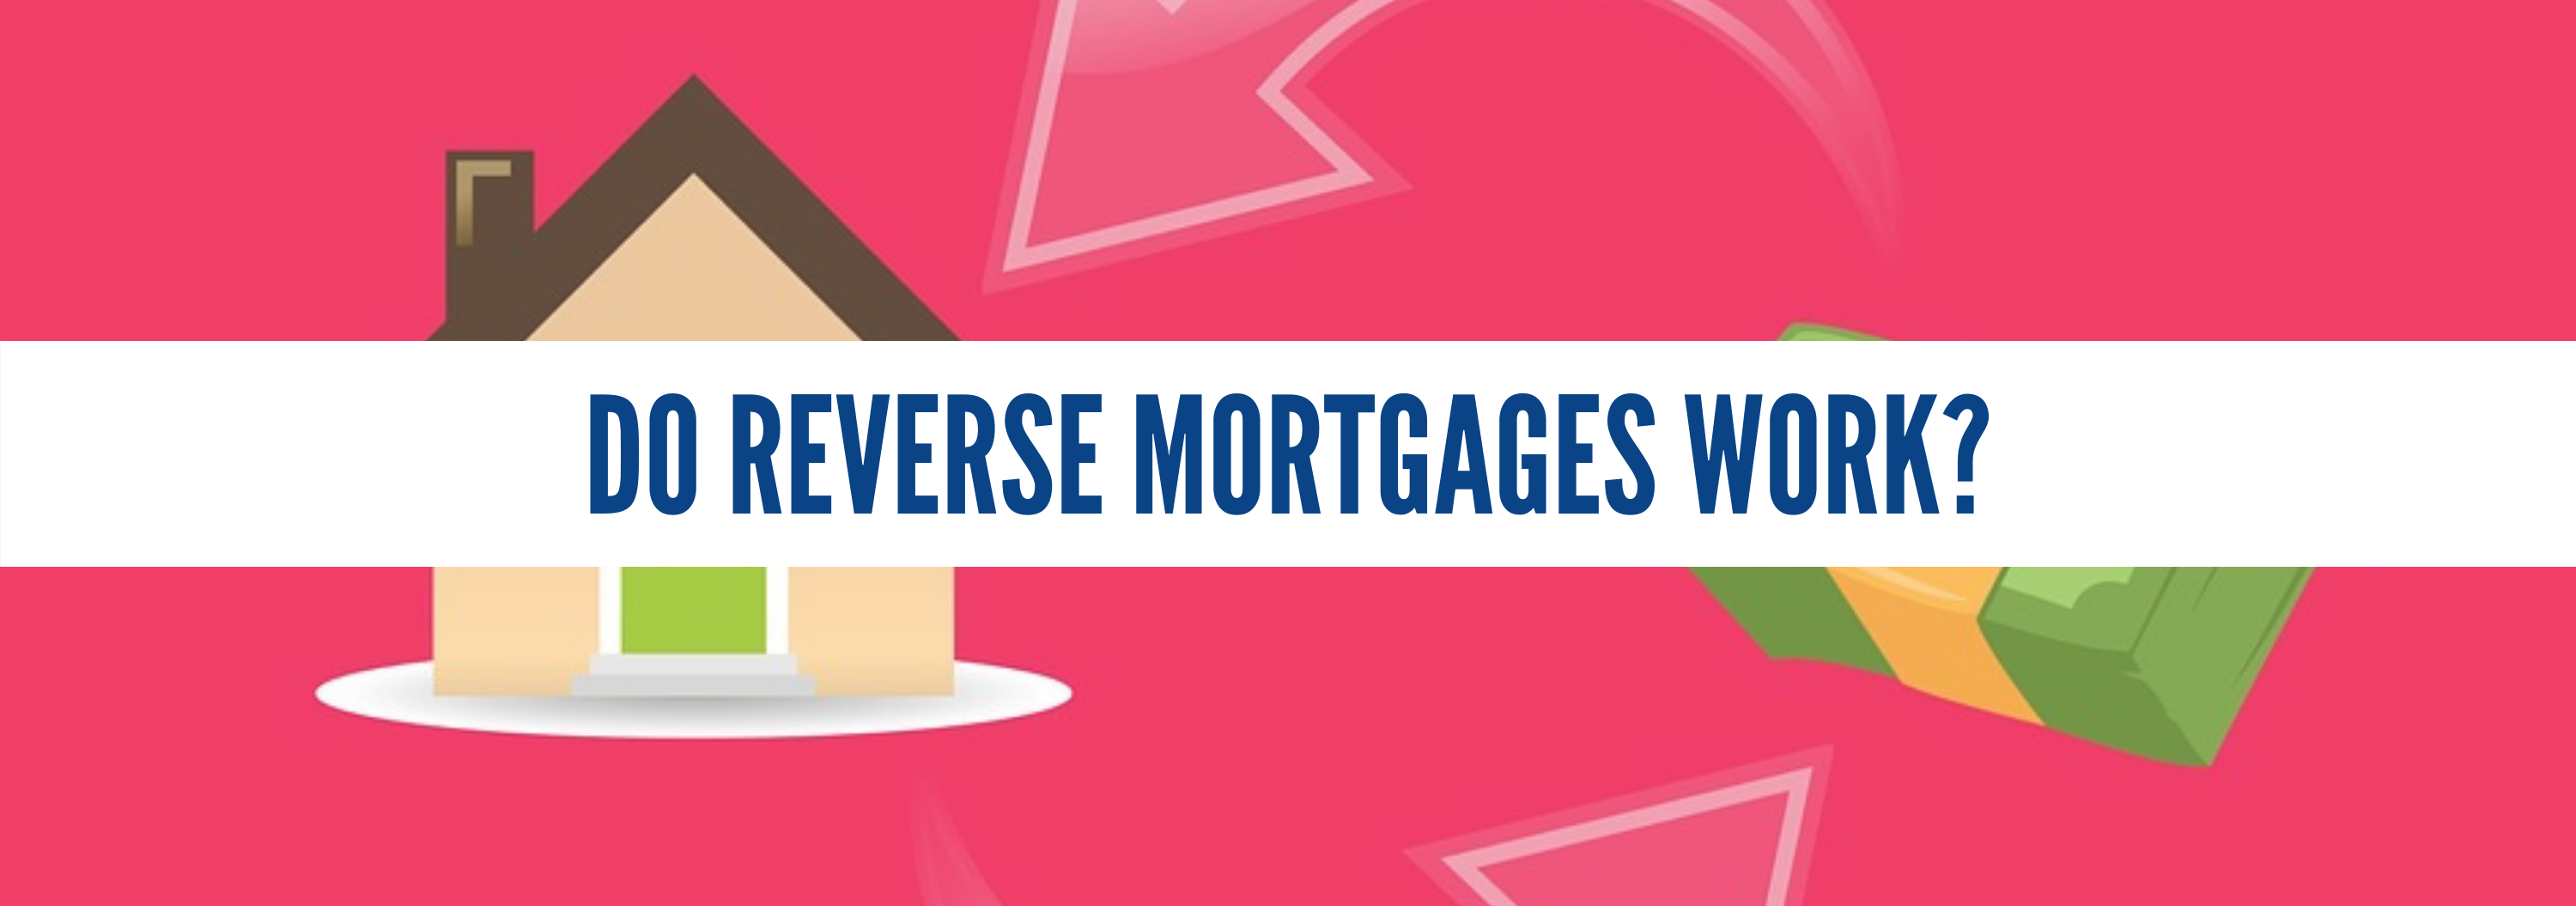 Do Reverse Mortgages Work?